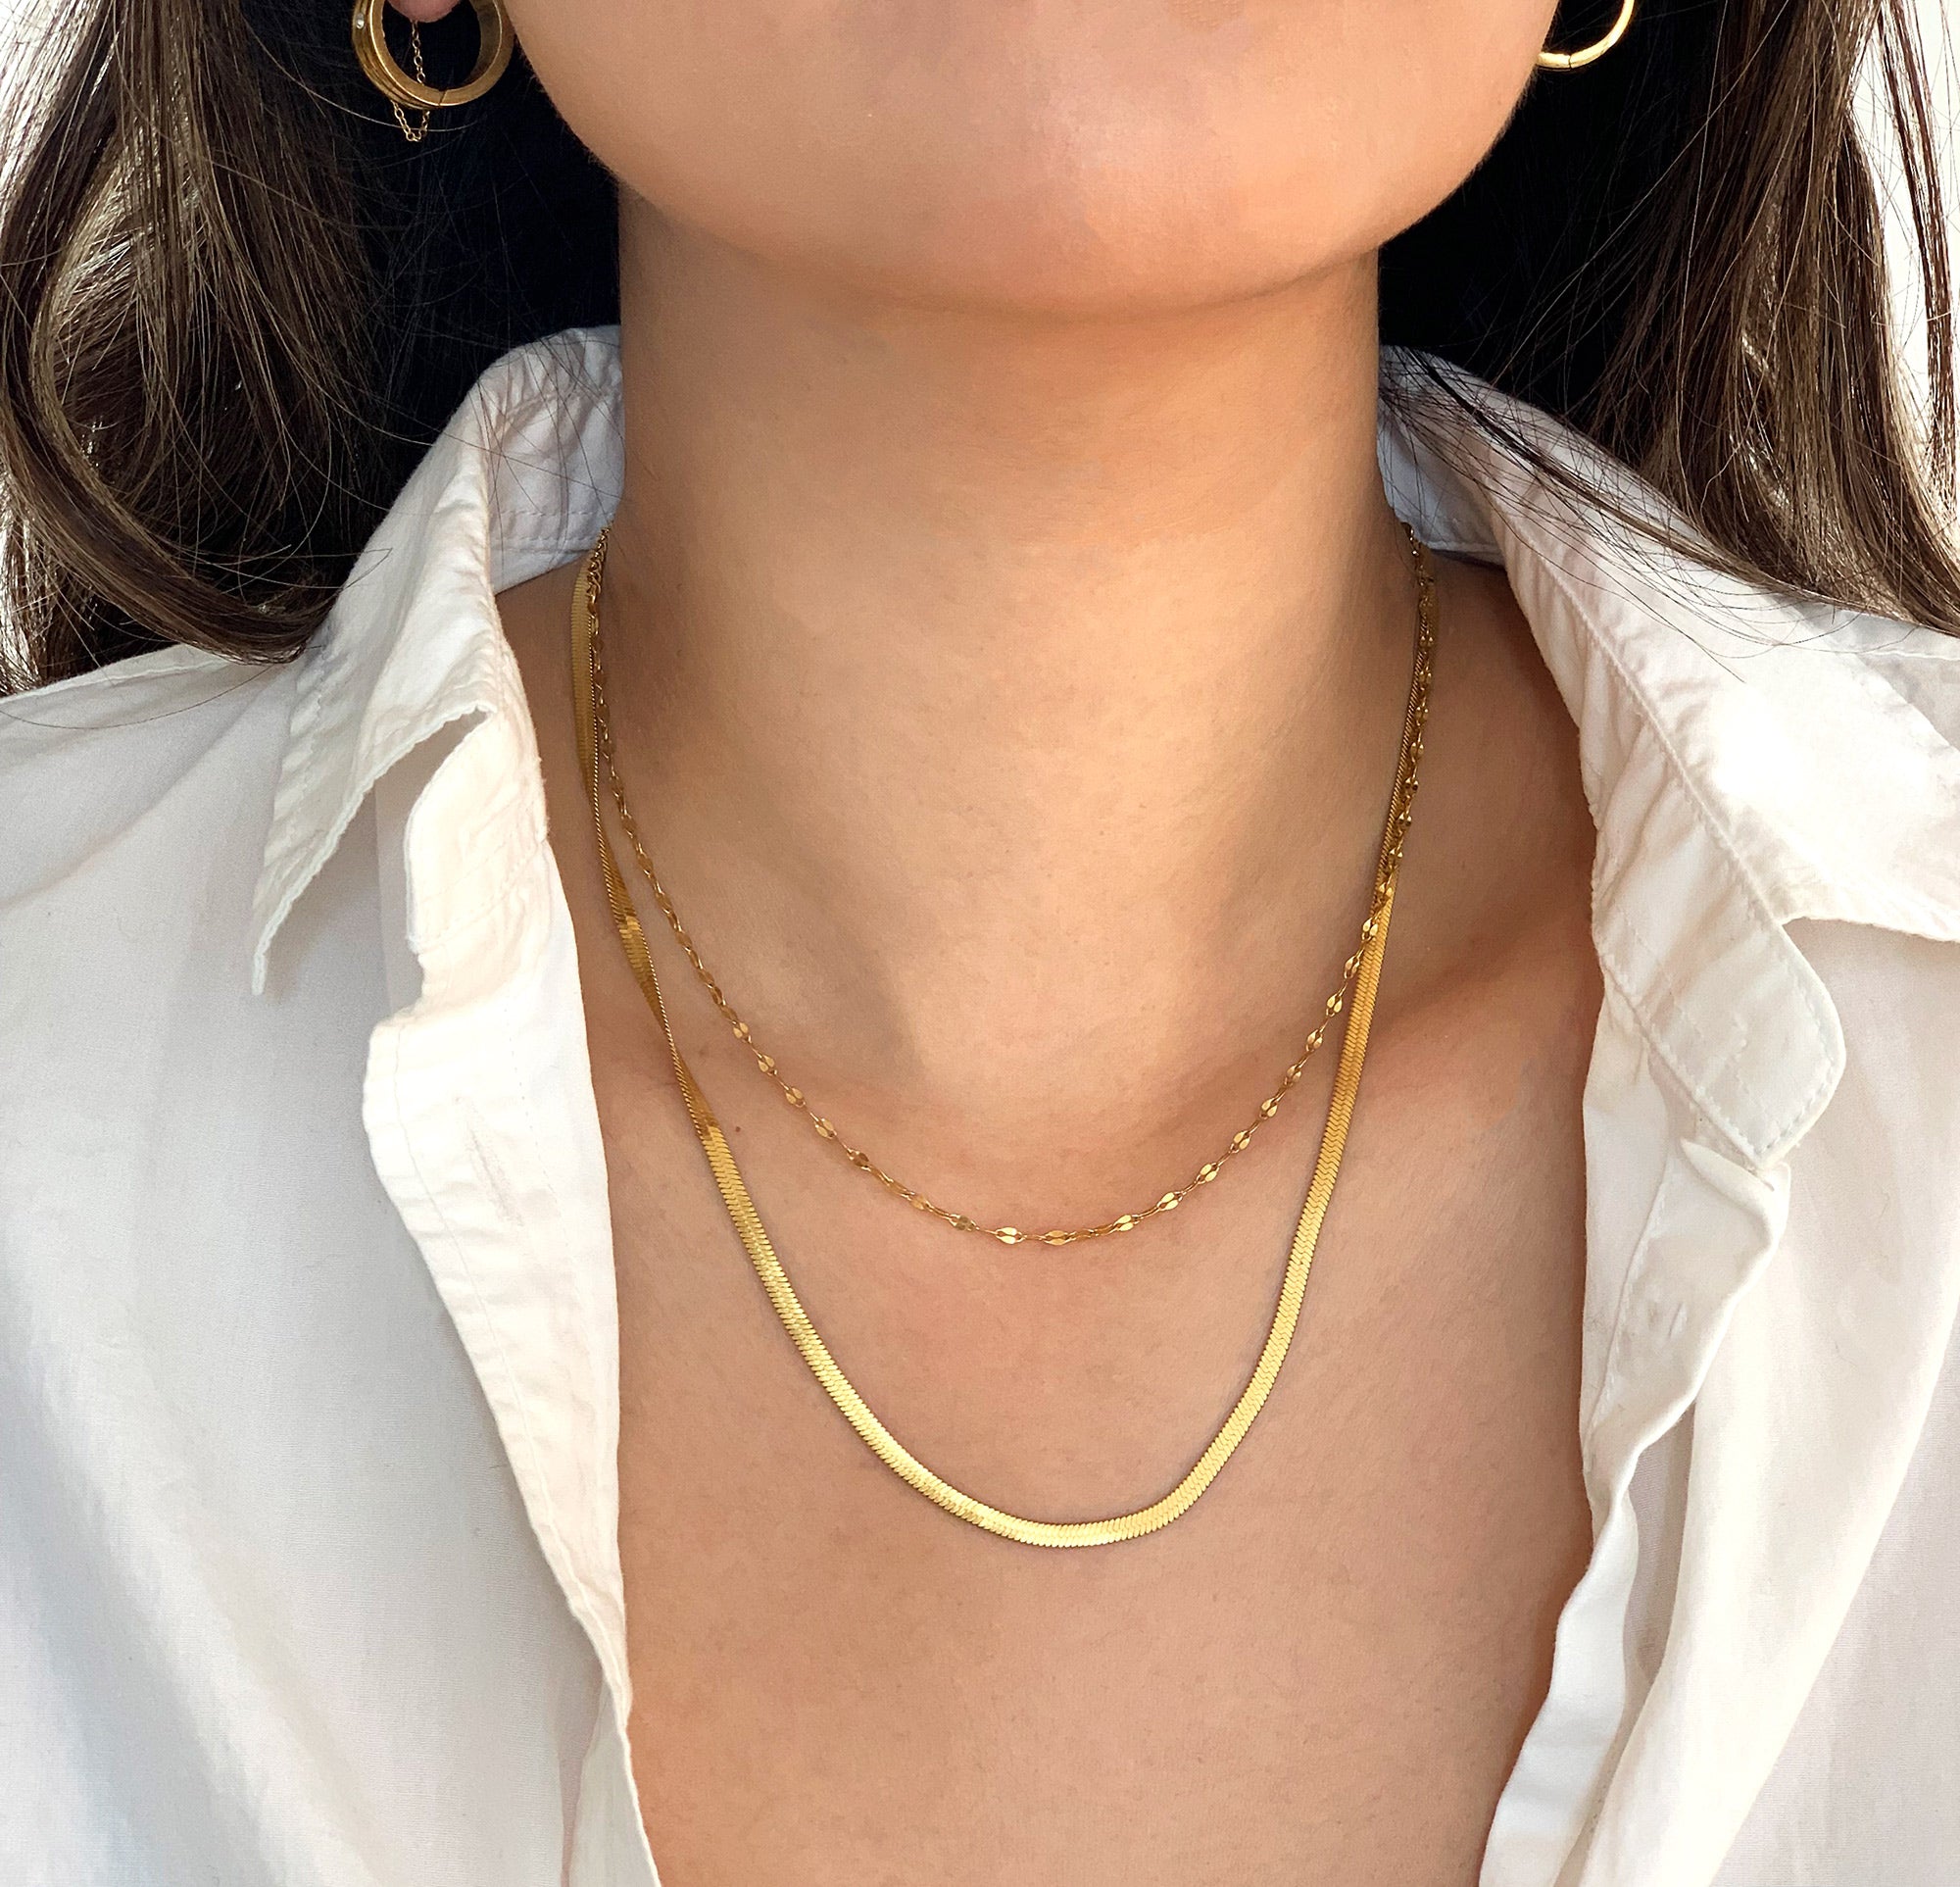 DAINTY GOLD SNAKE AND LACE CHAIN SET